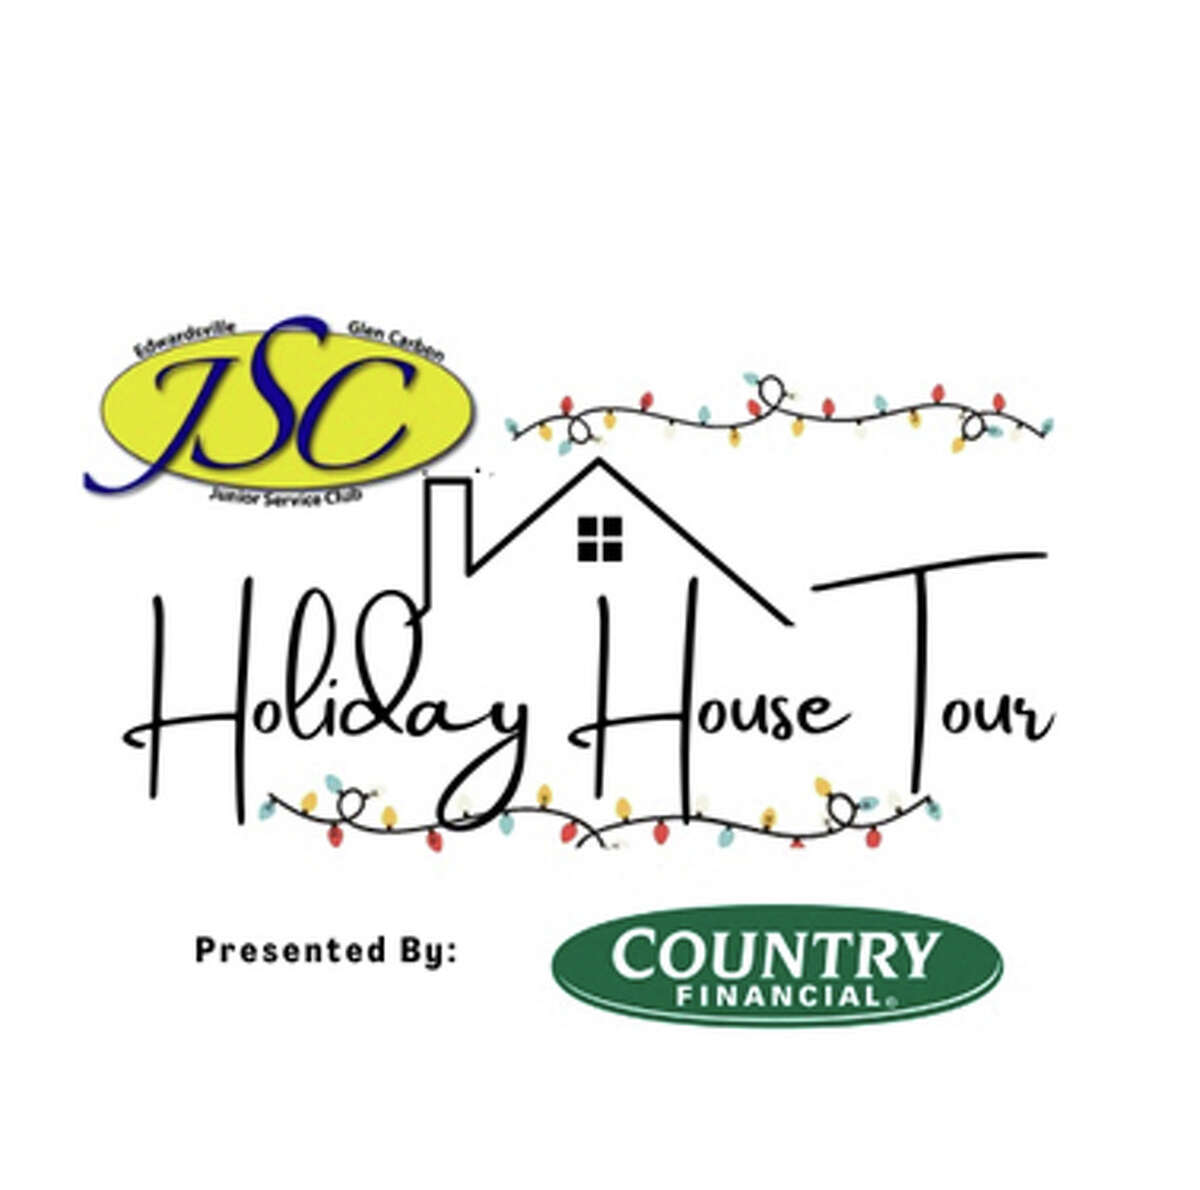 The Junior Service Club of Edwardsville and Glen Carbon (JSC) Holiday House Tour is set for Sunday, Dec. 11.